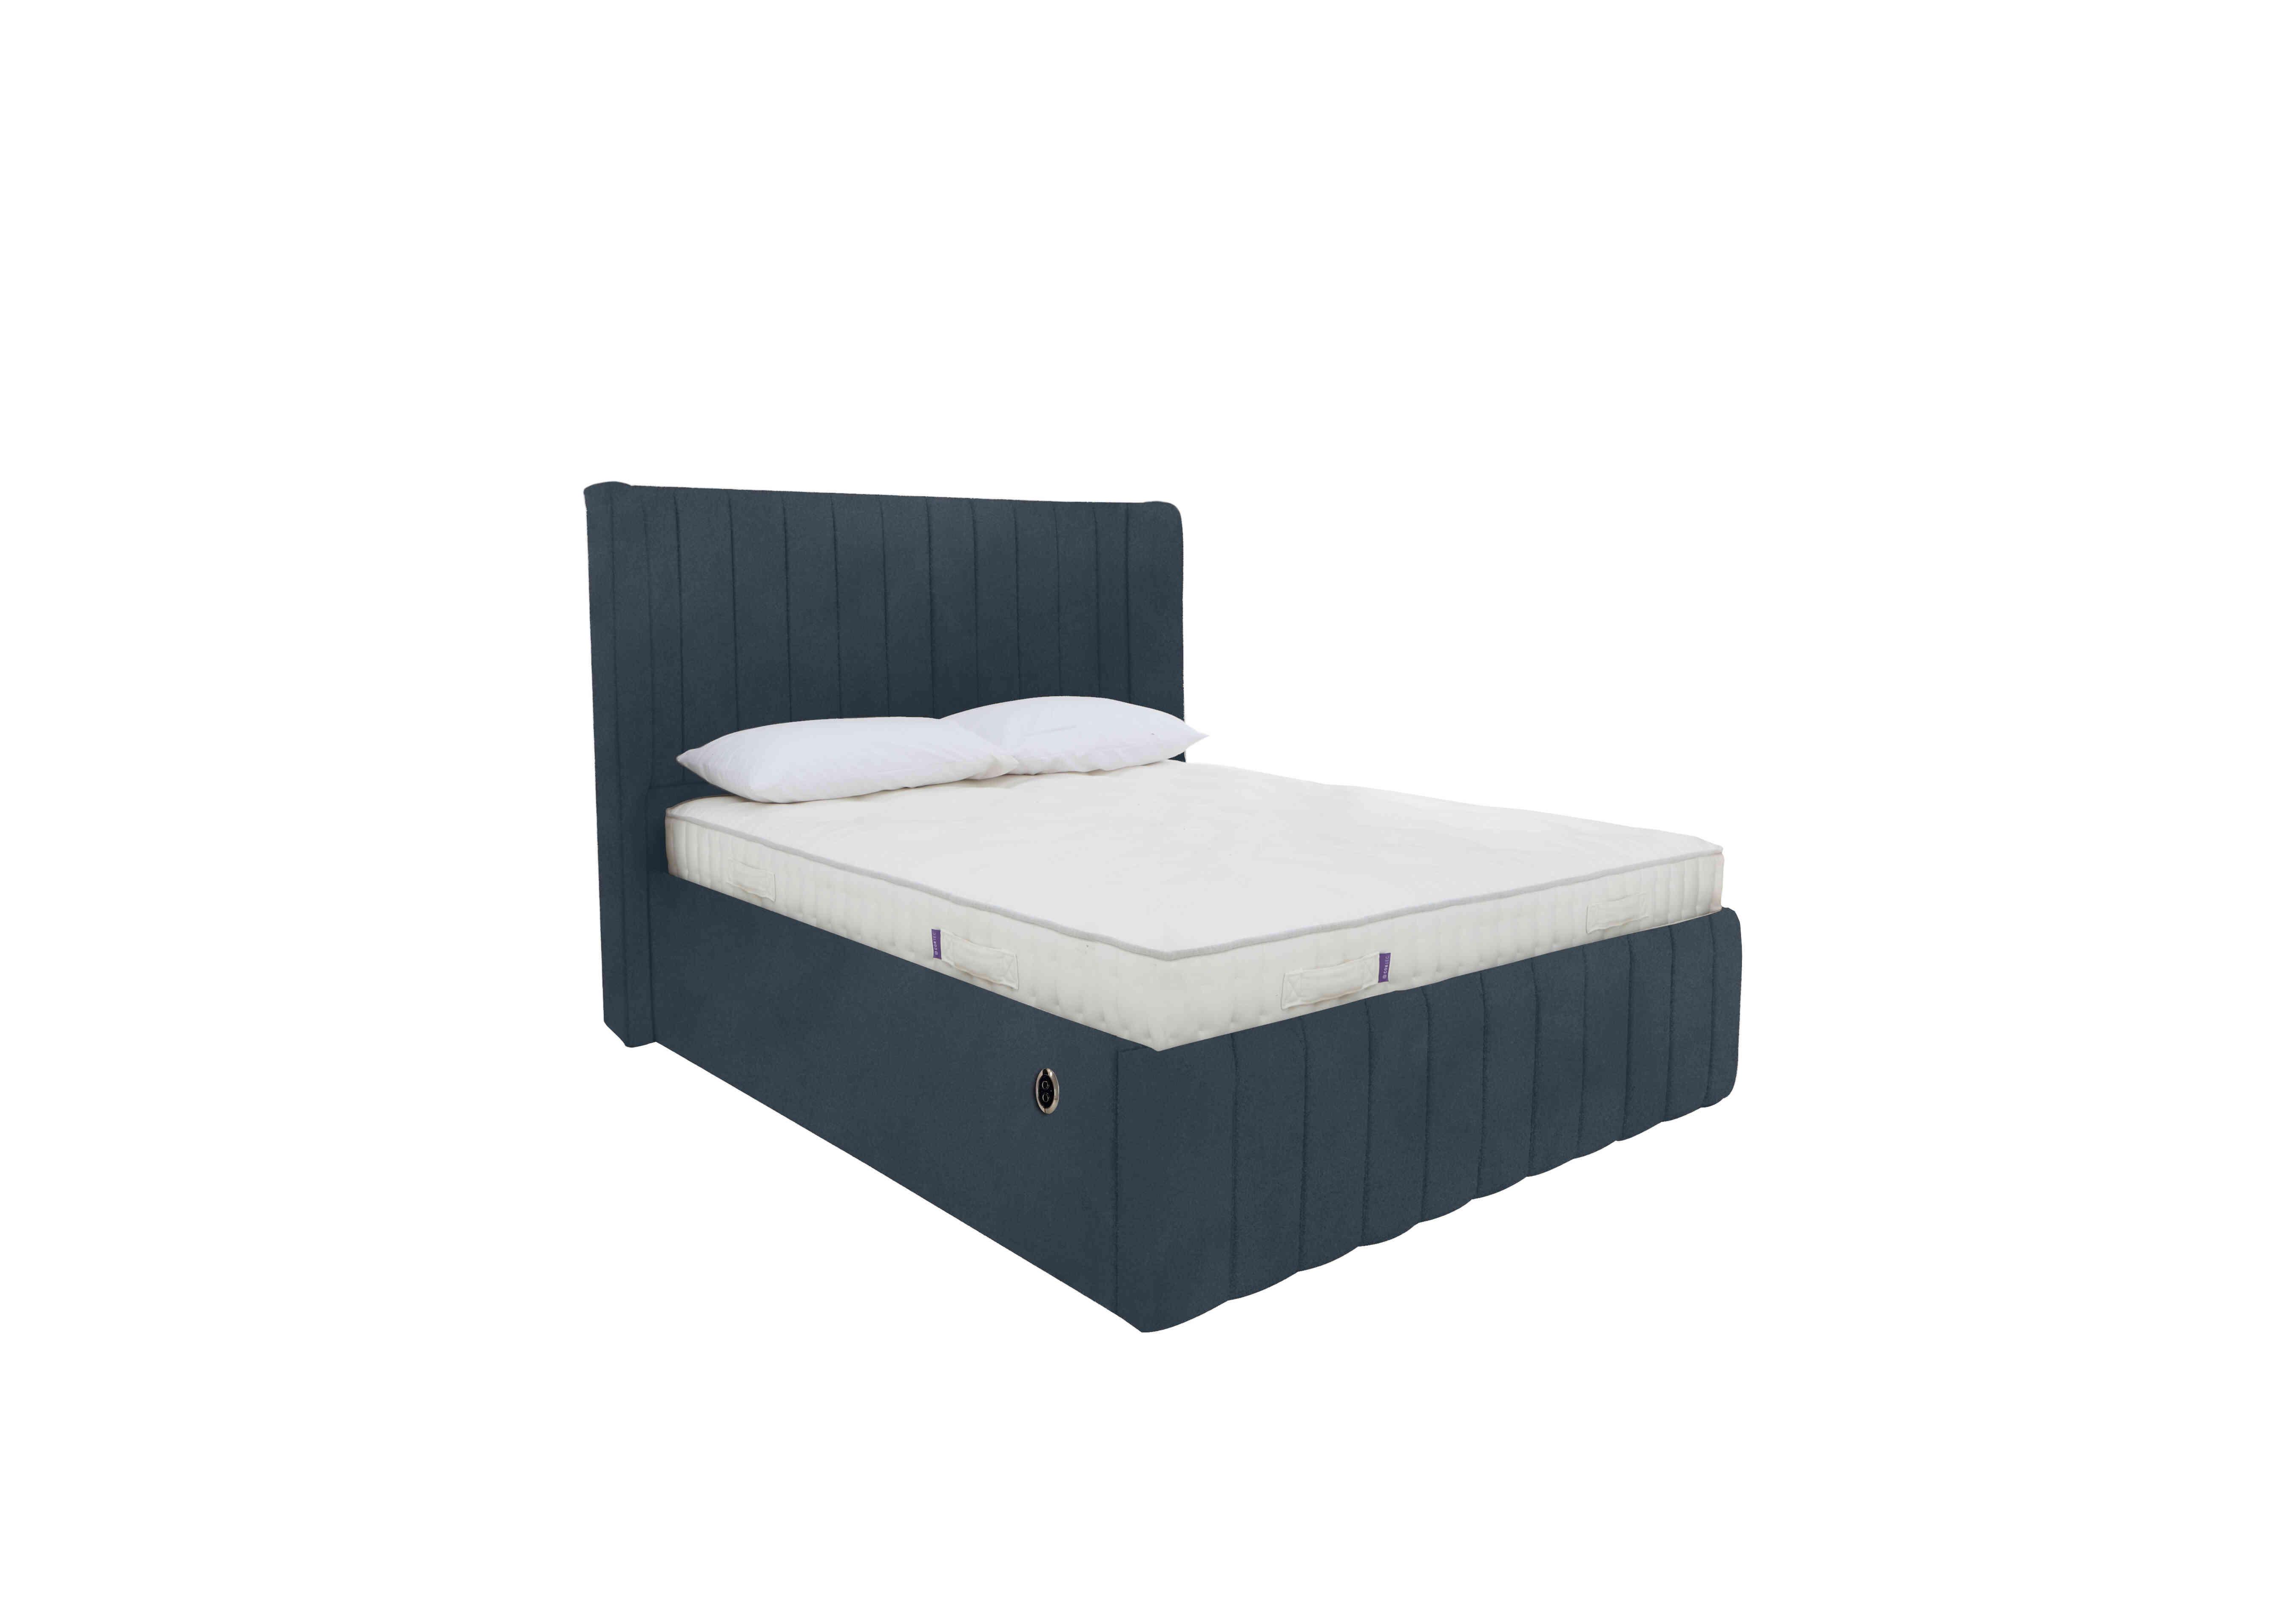 Eira Low Foot End Electric Ottoman Bed Frame in Sanderson Safari on Furniture Village